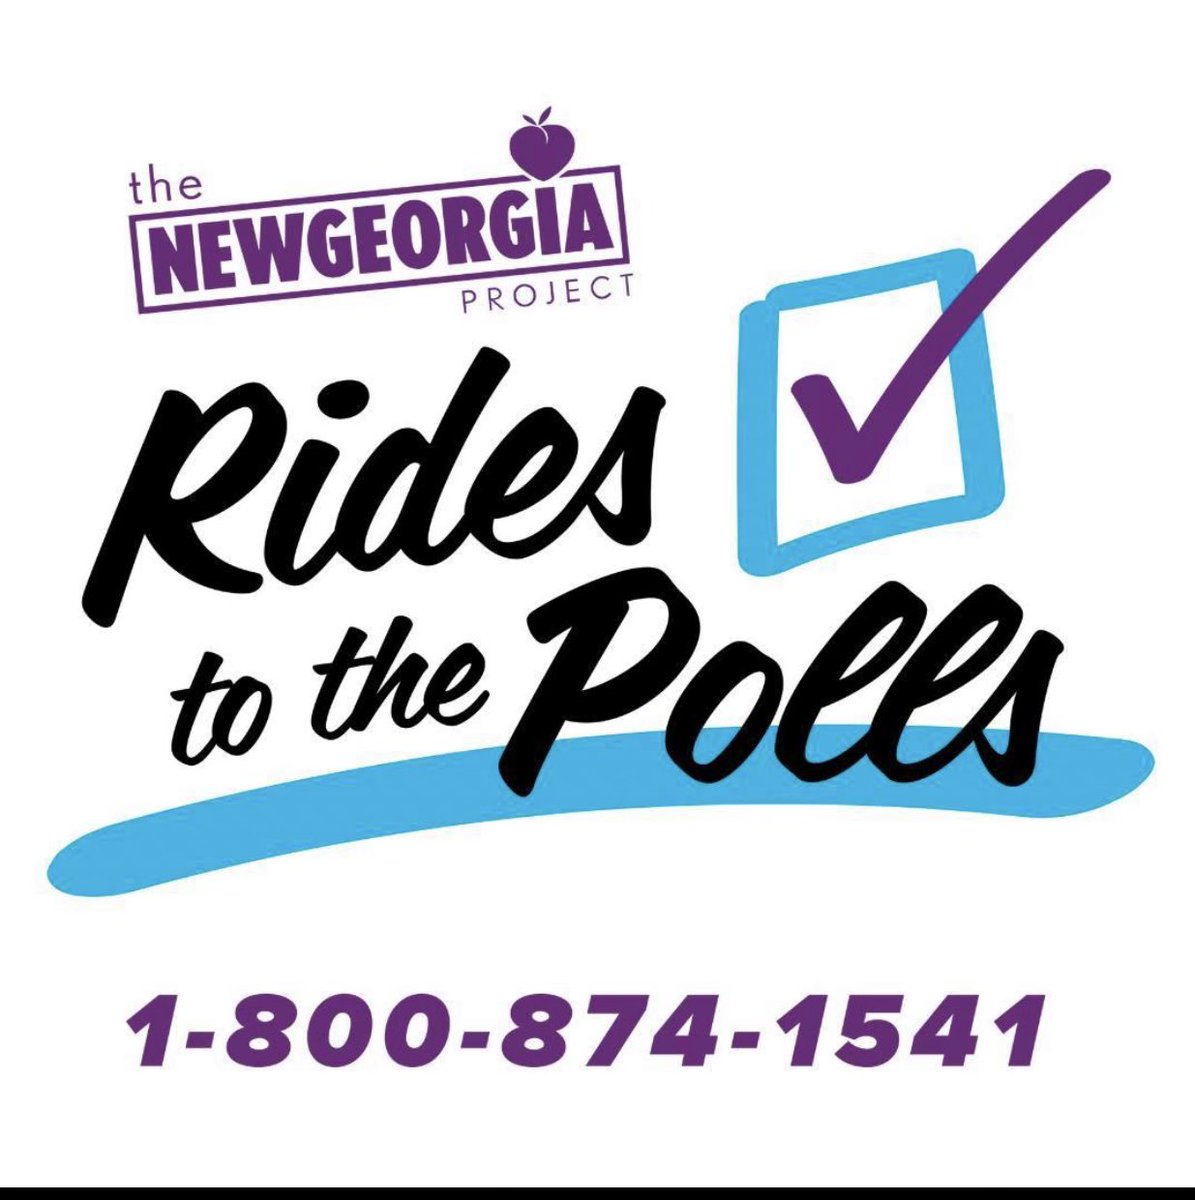 The New Georgia Project Free Rides To The Poll drivers are Fired Up and Ready To Go!#NGP #NewGeorgiaProject #municipalelections2021. #earlyvote